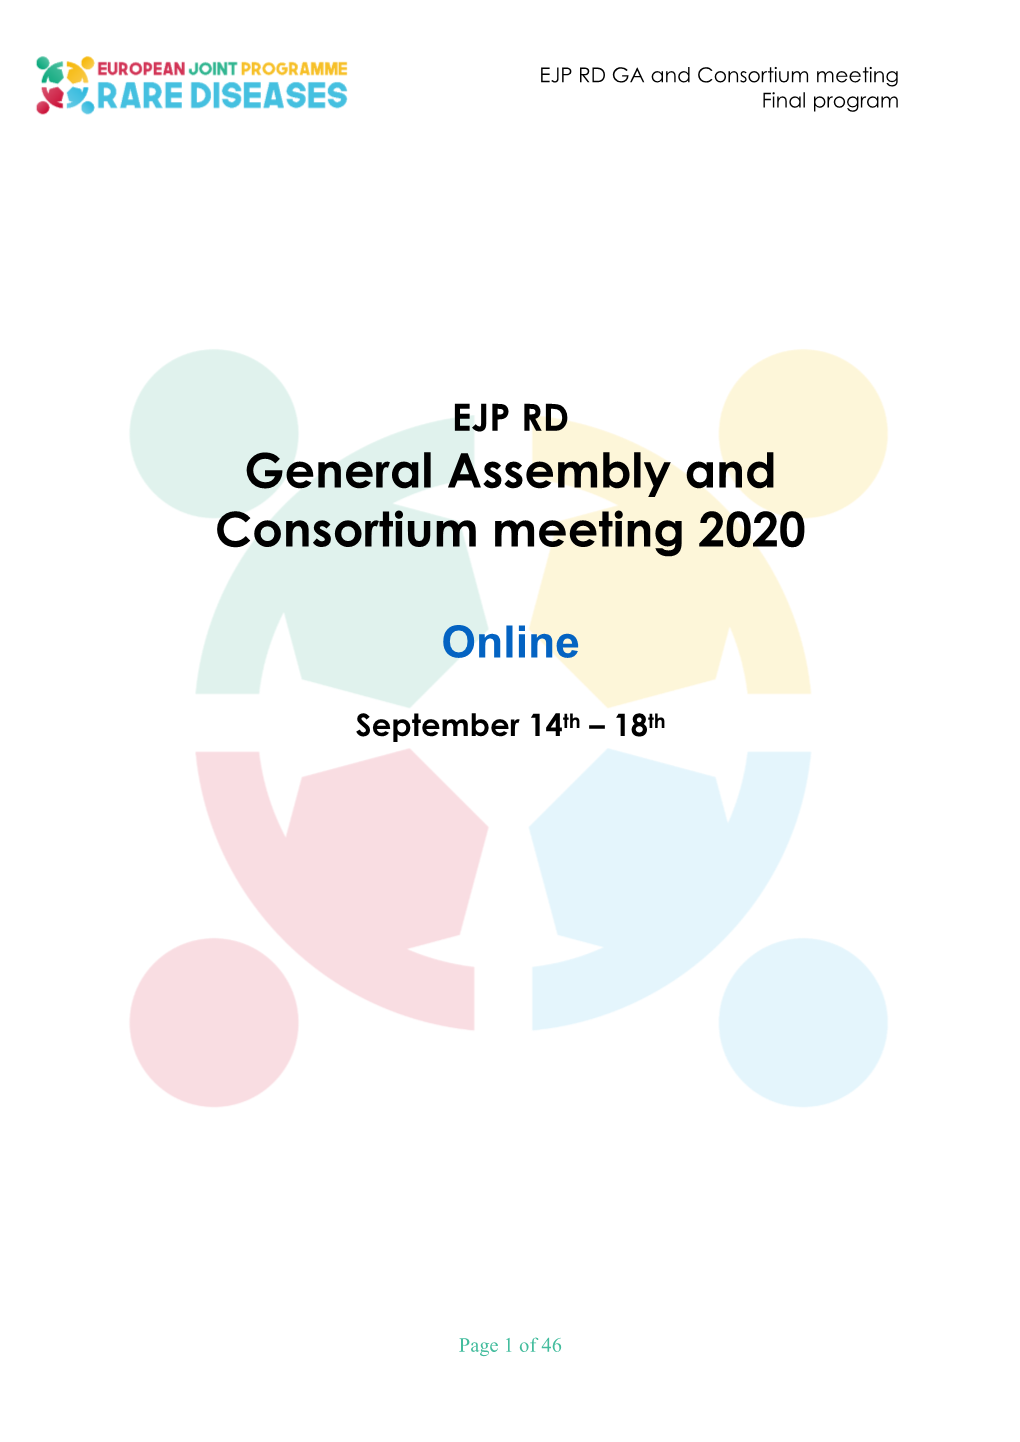 General Assembly and Consortium Meeting 2020